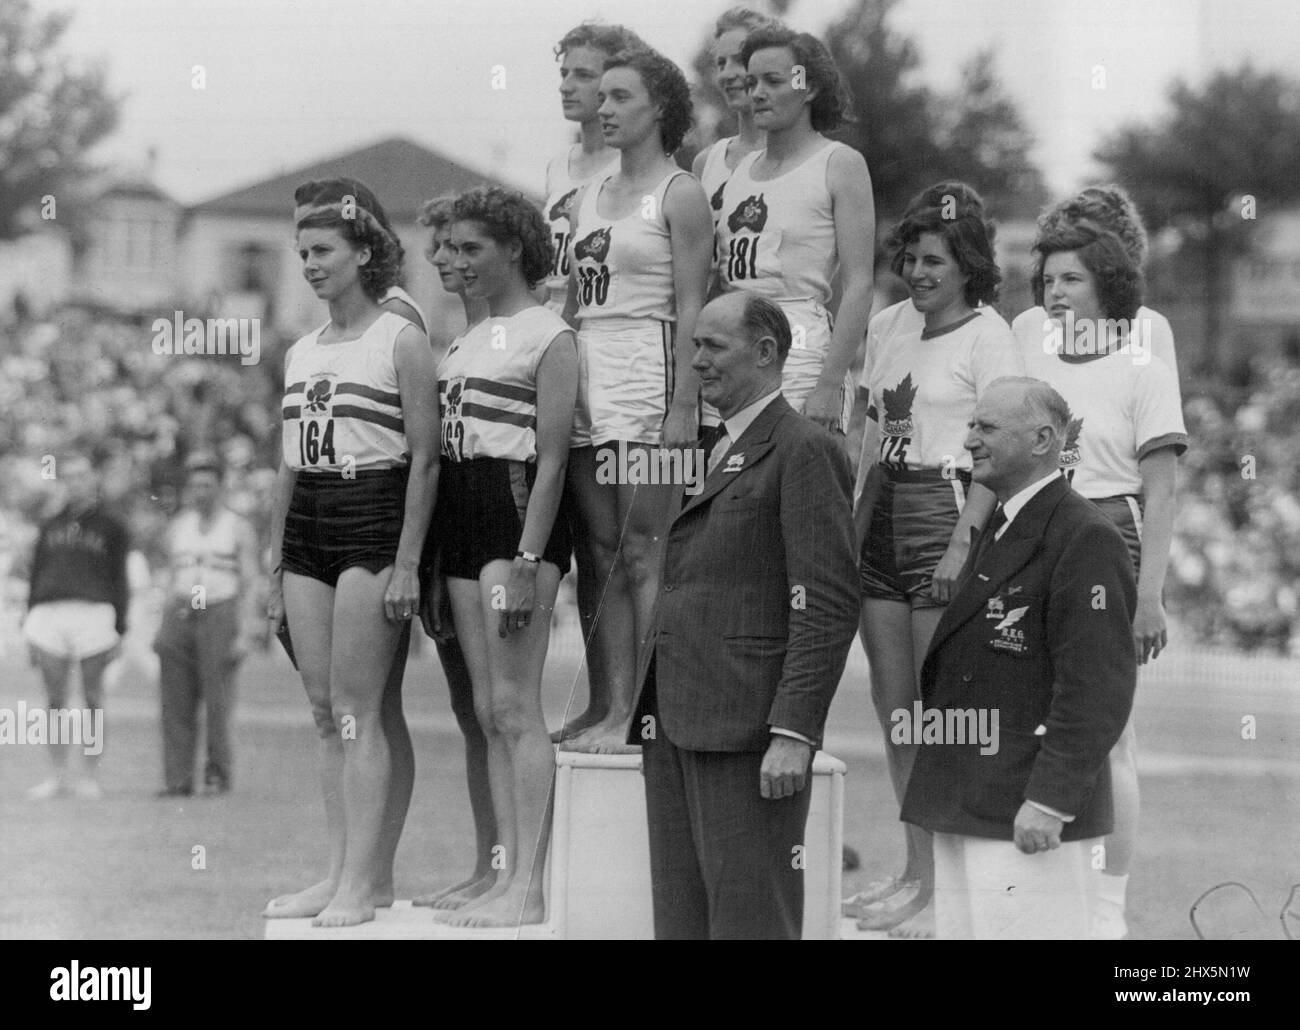 Empire Games Athletics, Final Day, Eden Park, Auckland -- On the Victory Stand after the women's 660 yards relay. The winners (Australia), centre, comprise V. Johnston, A. Shanley, M. Jackson and S. Strickland. England (second) comprise M. Walker, D.G. Manley, S. Cheeseman and D. Batter. Canada (third) comprise E. Silburn, G. Bemister, E. McKenzie and P. Jones. June 14, 1950. (Photo by The N.Z. Herald). Stock Photo